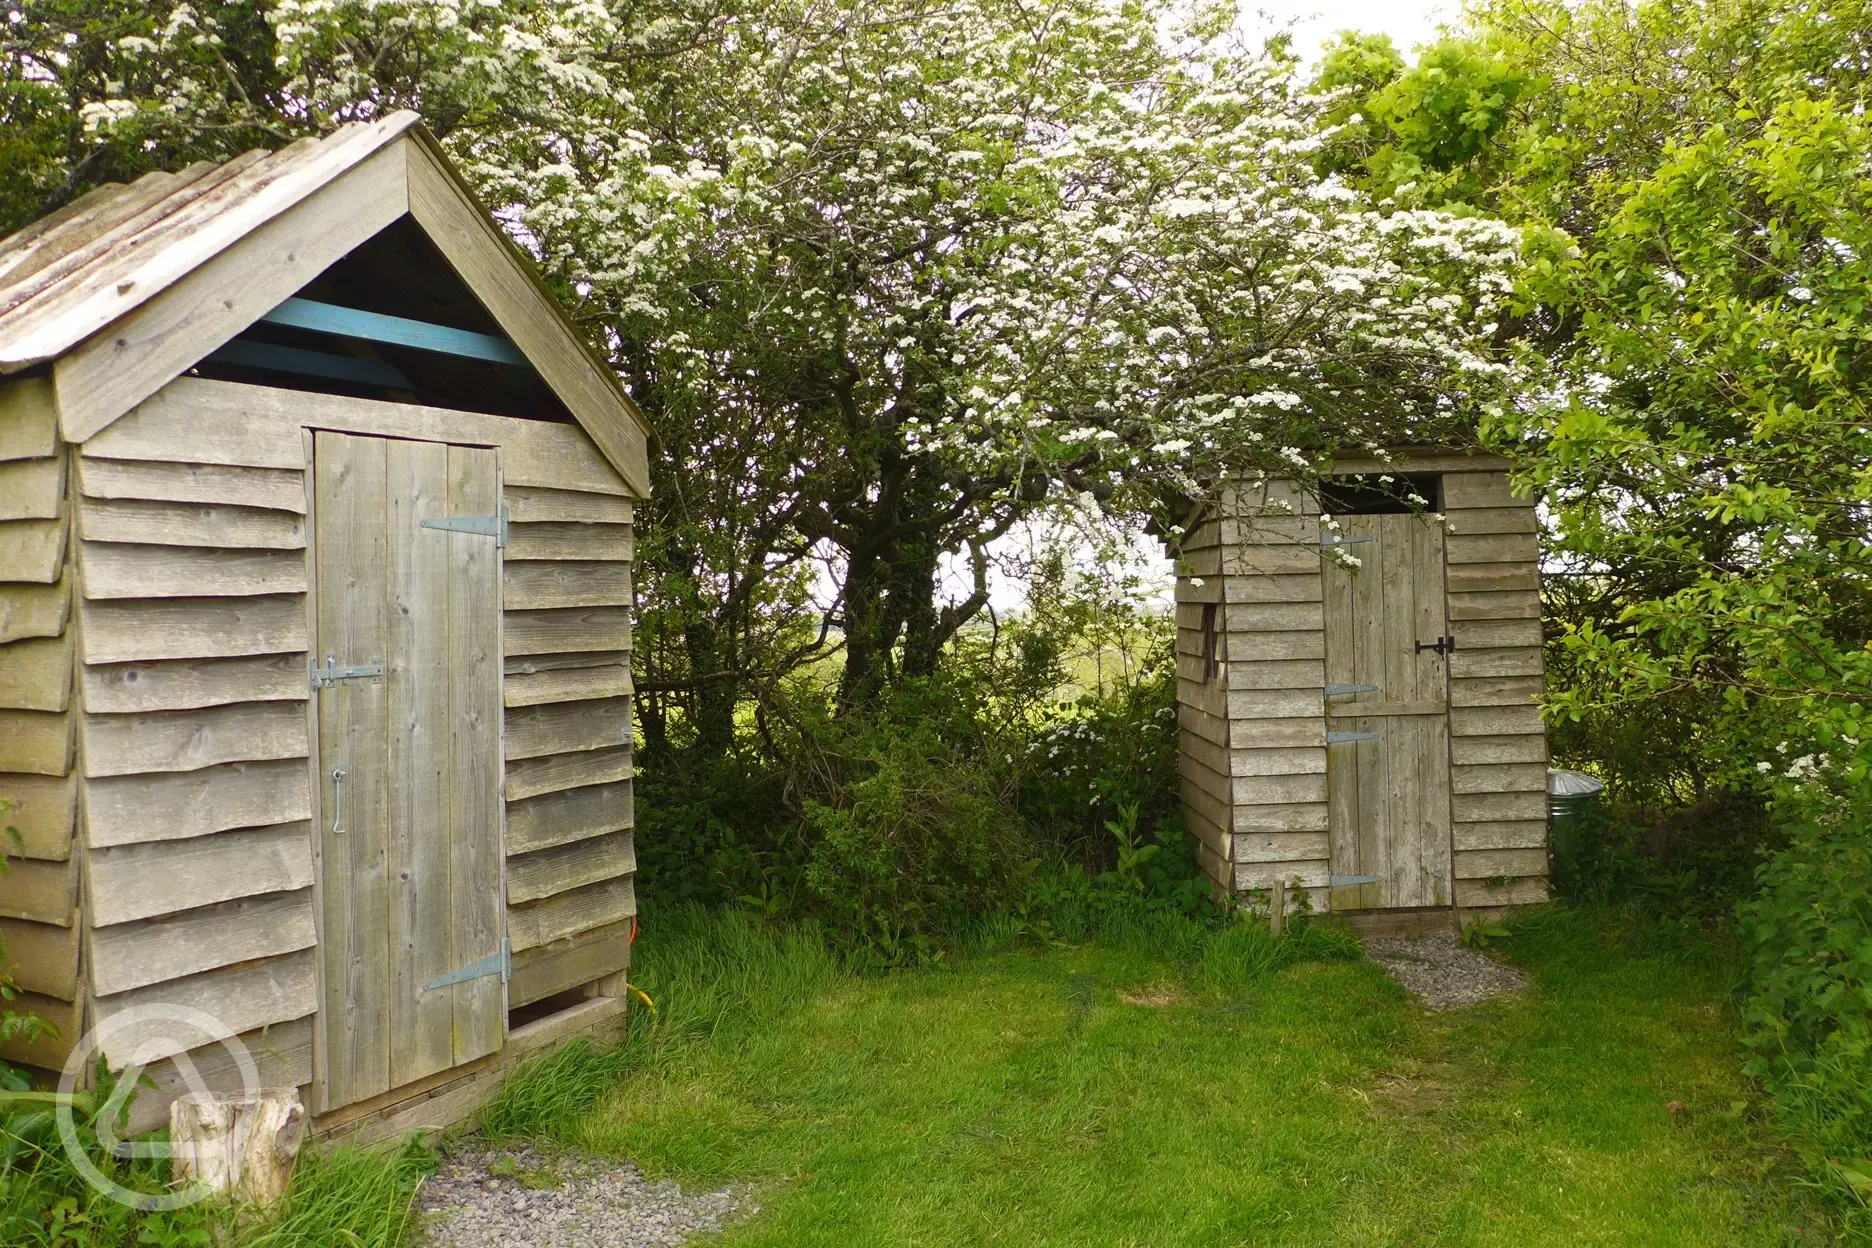 Compost toilet and shower huts at Great Orchard Cabin